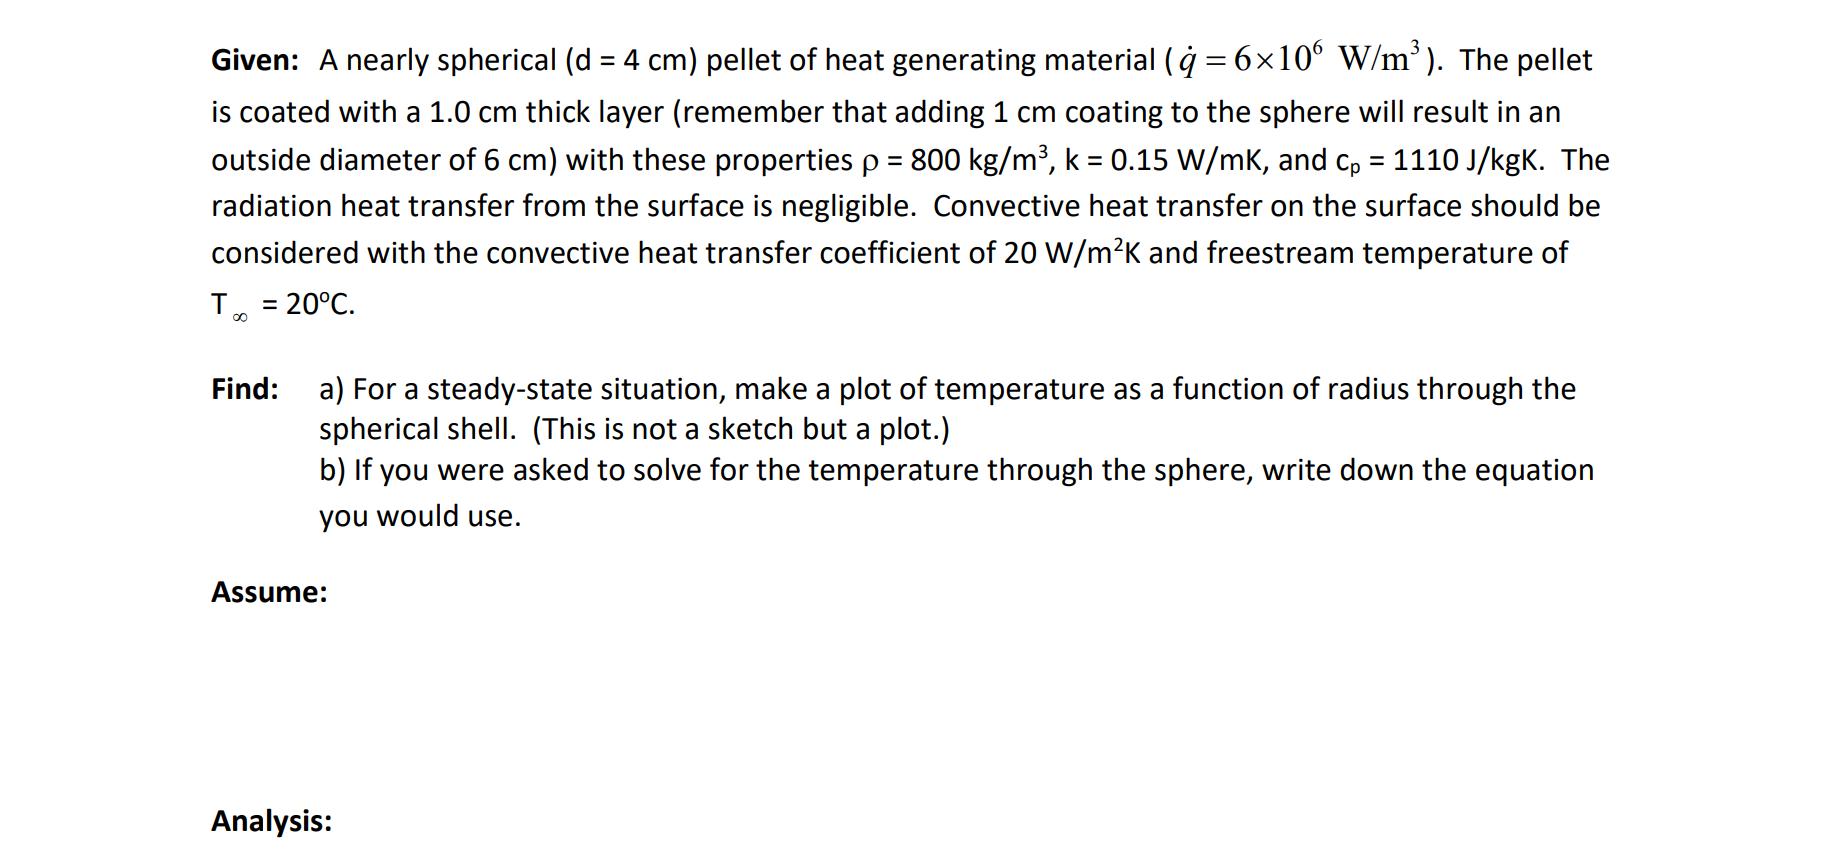 Given: A nearly spherical (d = 4 cm) pellet of heat generating material ( = 6106 W/m). The pellet is coated